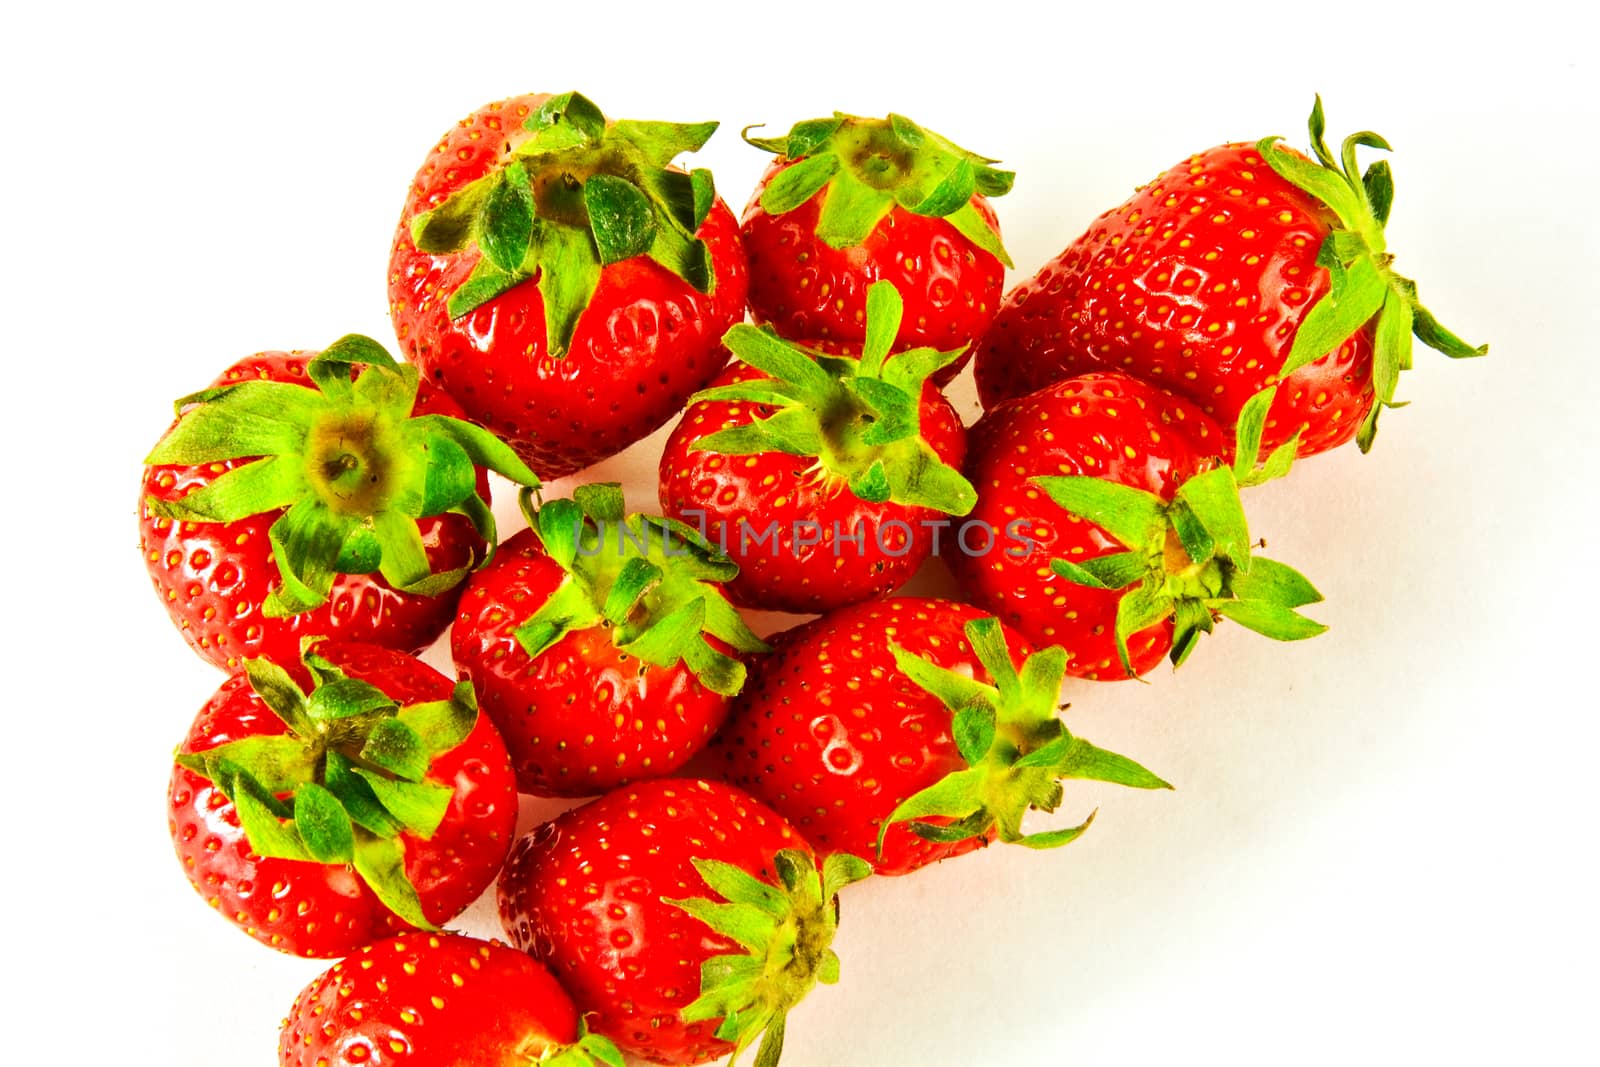 Berries are large and ripe strawberry on a white background by Grommik